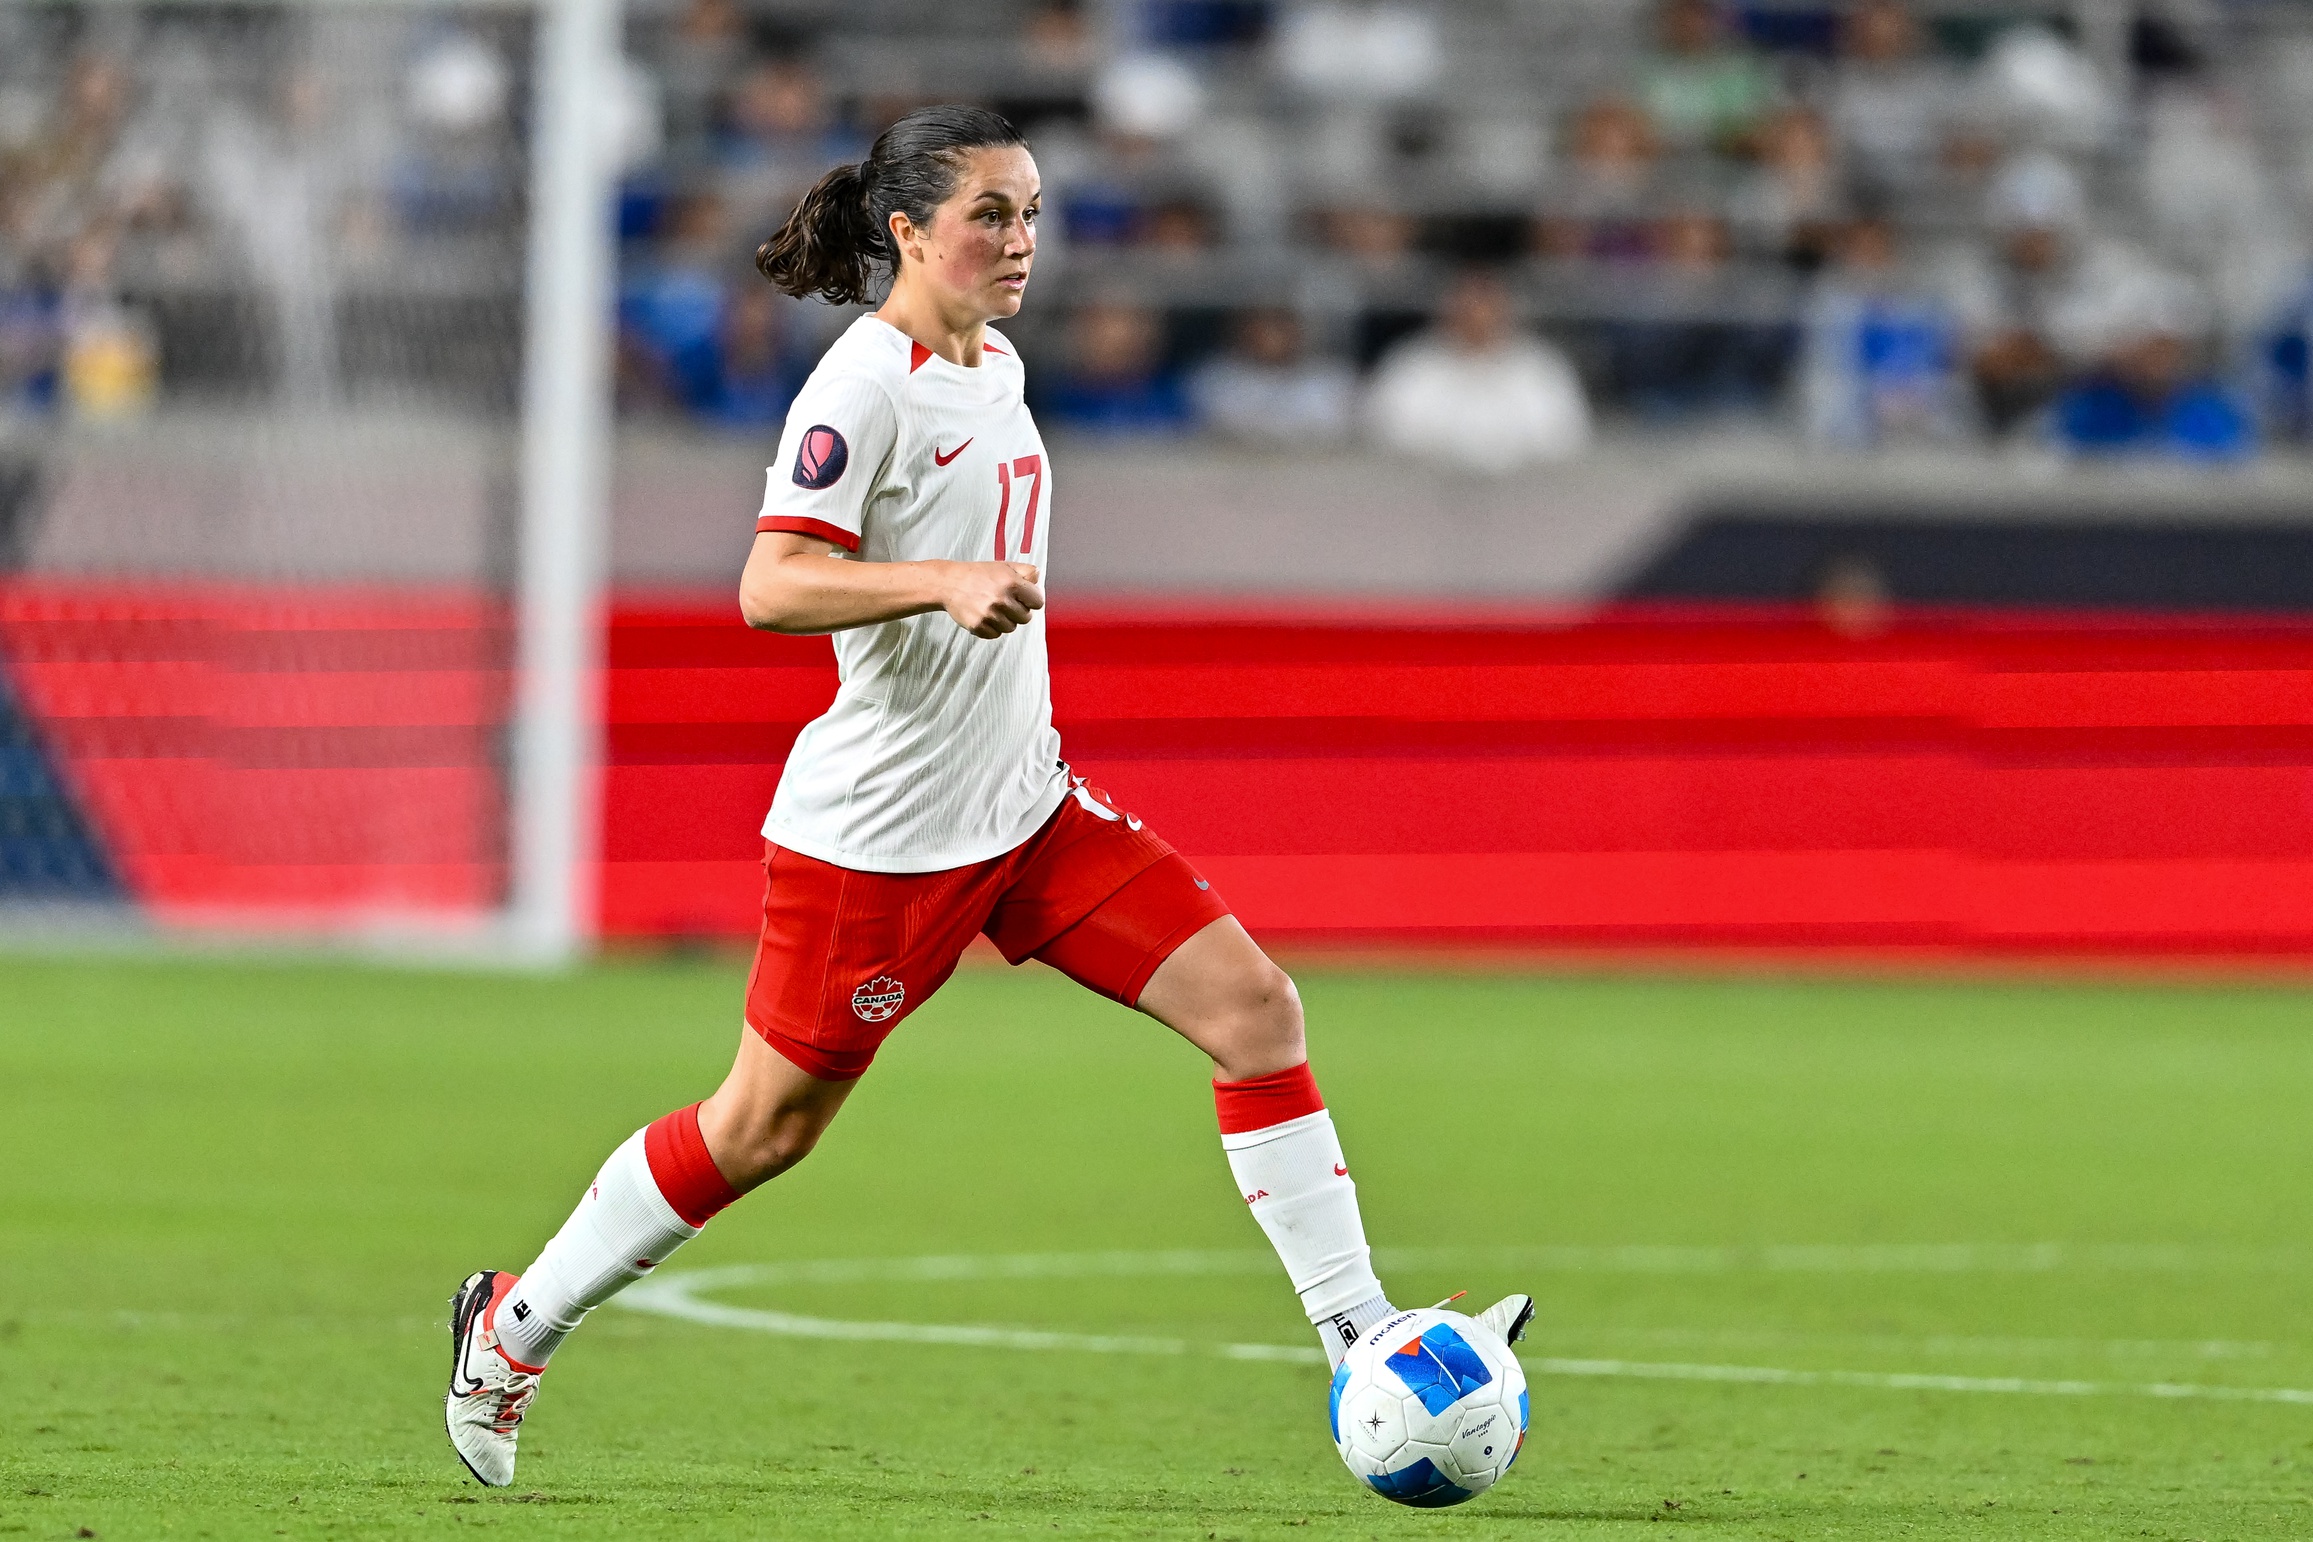 CanWNT Midfielder Jessie Fleming Will Be A Key Player in the Paraguay vs CanWNT Game